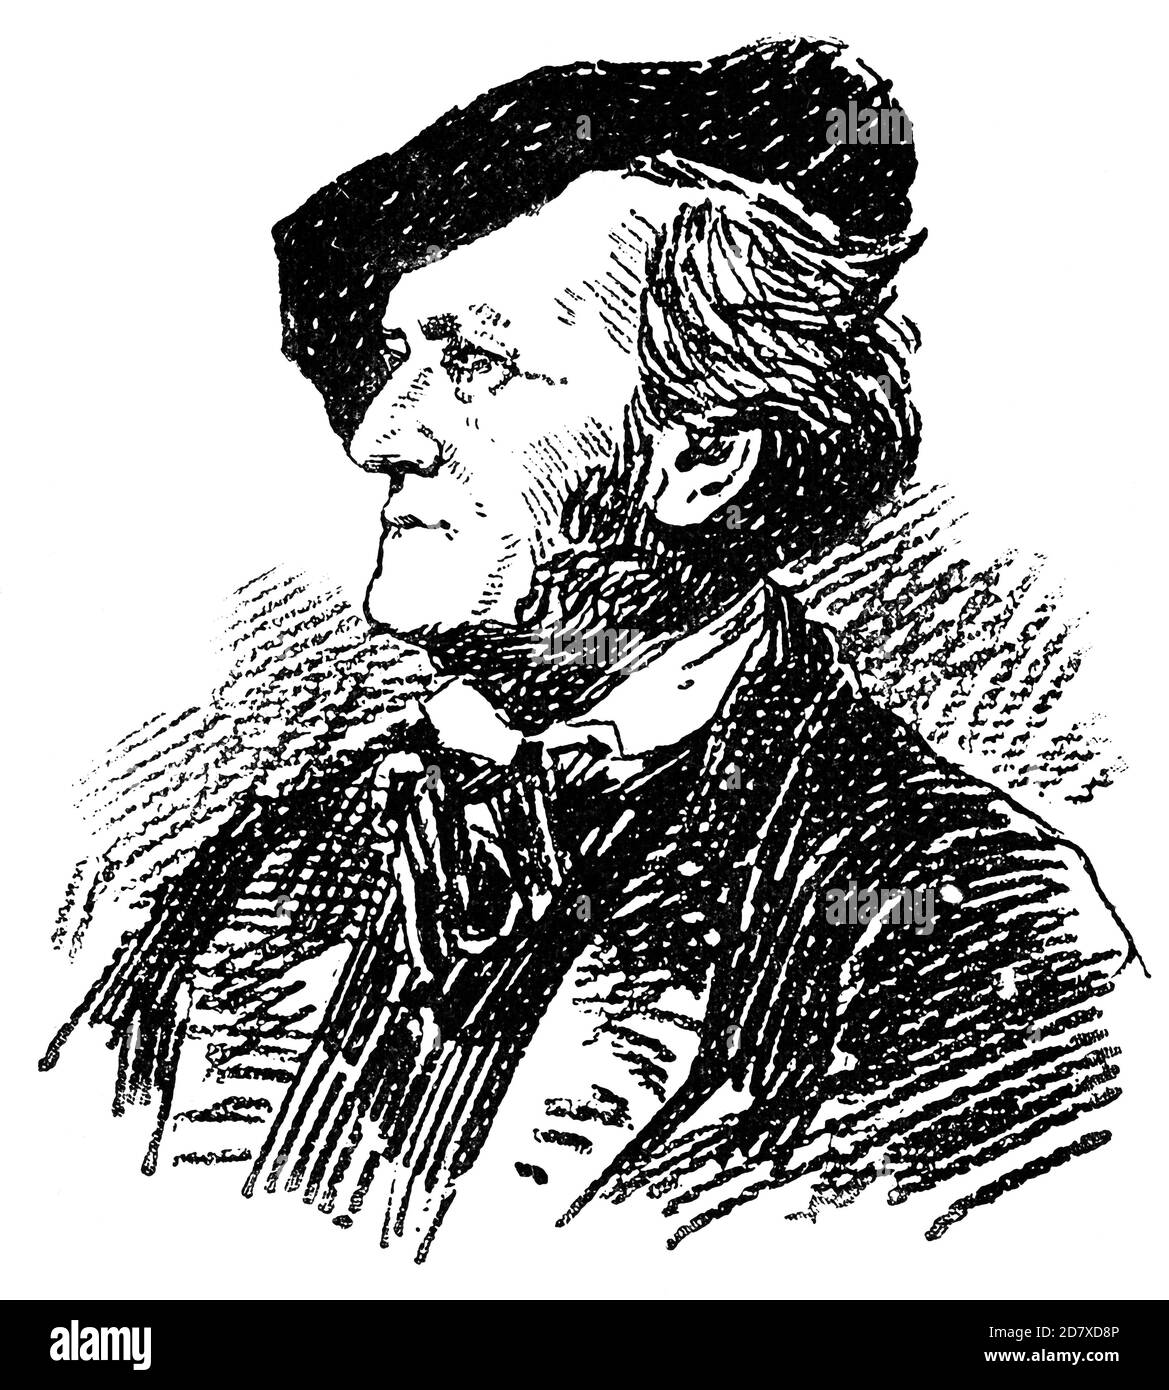 Wilhelm richard wagner was a german composer Cut Out Stock Images ...